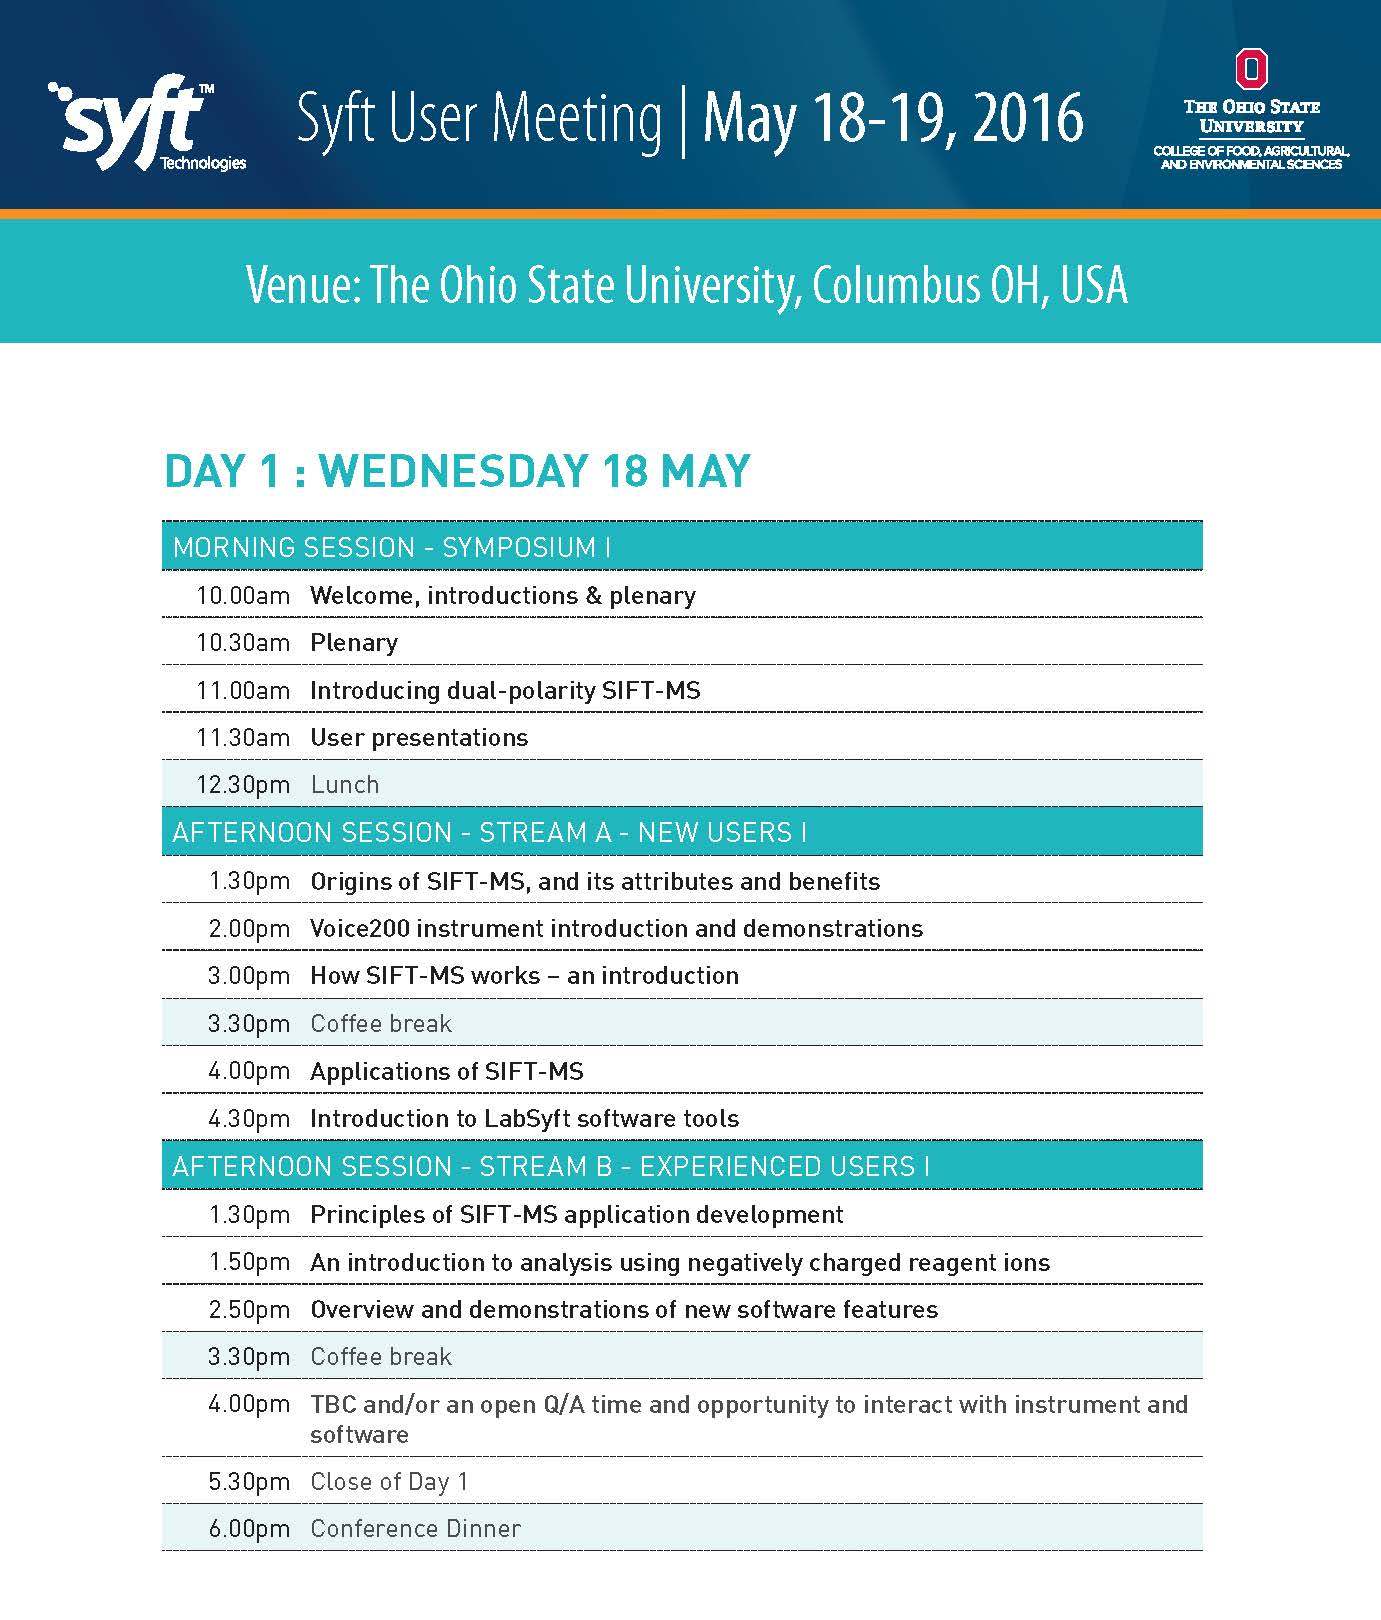 Syft 2016 User Meeting Schedule v1_Page_1